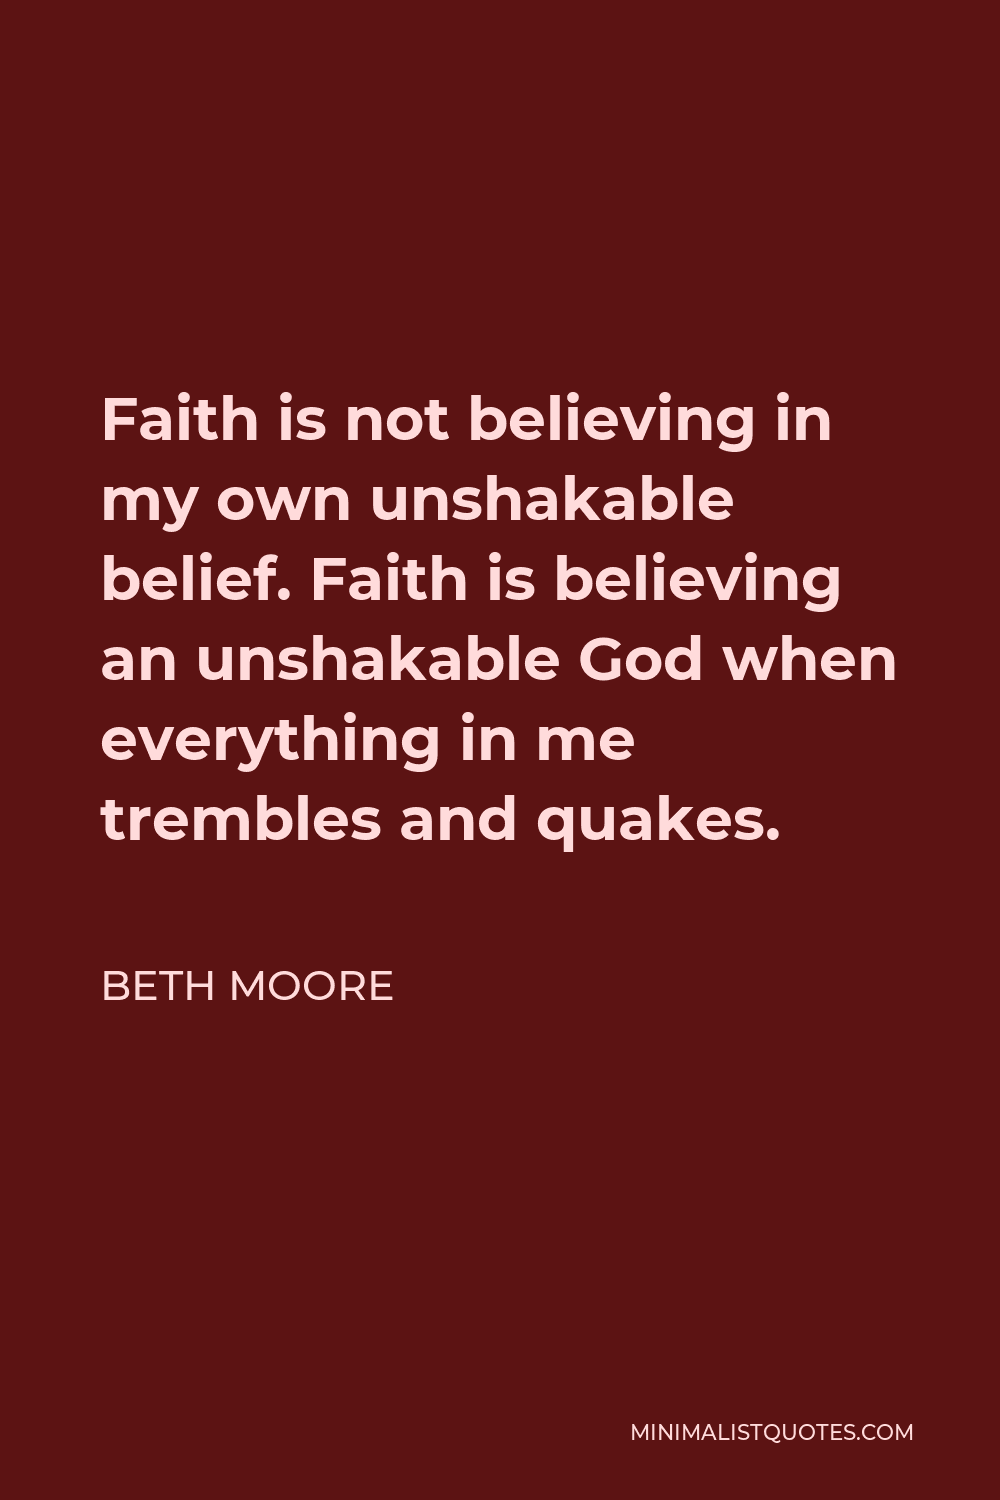 Beth Moore Quote - Faith is not believing in my own unshakable belief. Faith is believing an unshakable God when everything in me trembles and quakes.